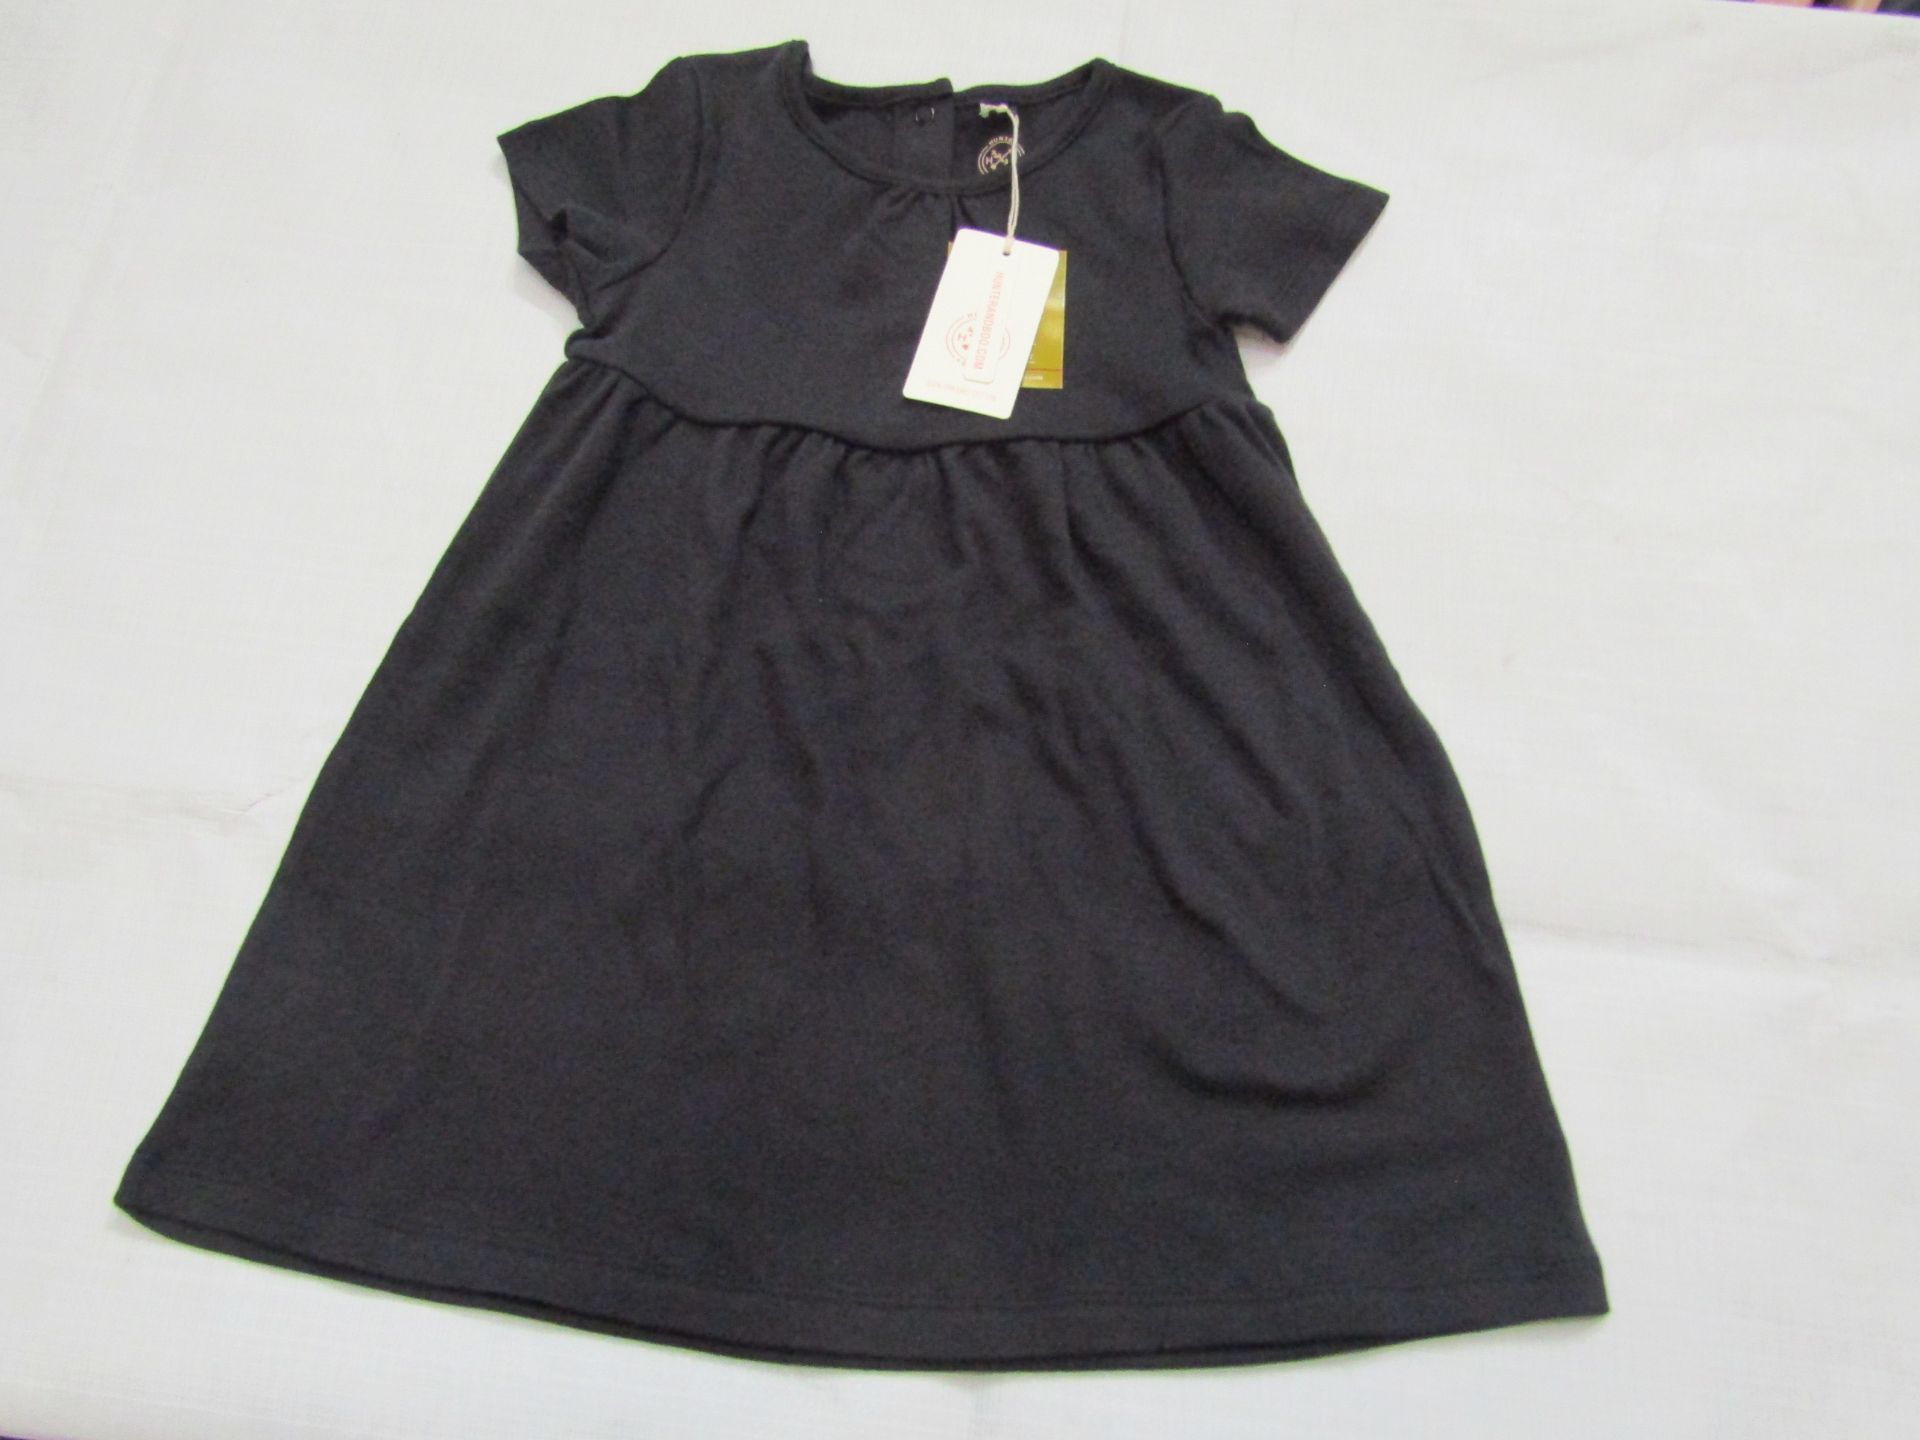 Hunter & Boo Dress Black Aged 3-4 yrs New & Packaged RRP £21